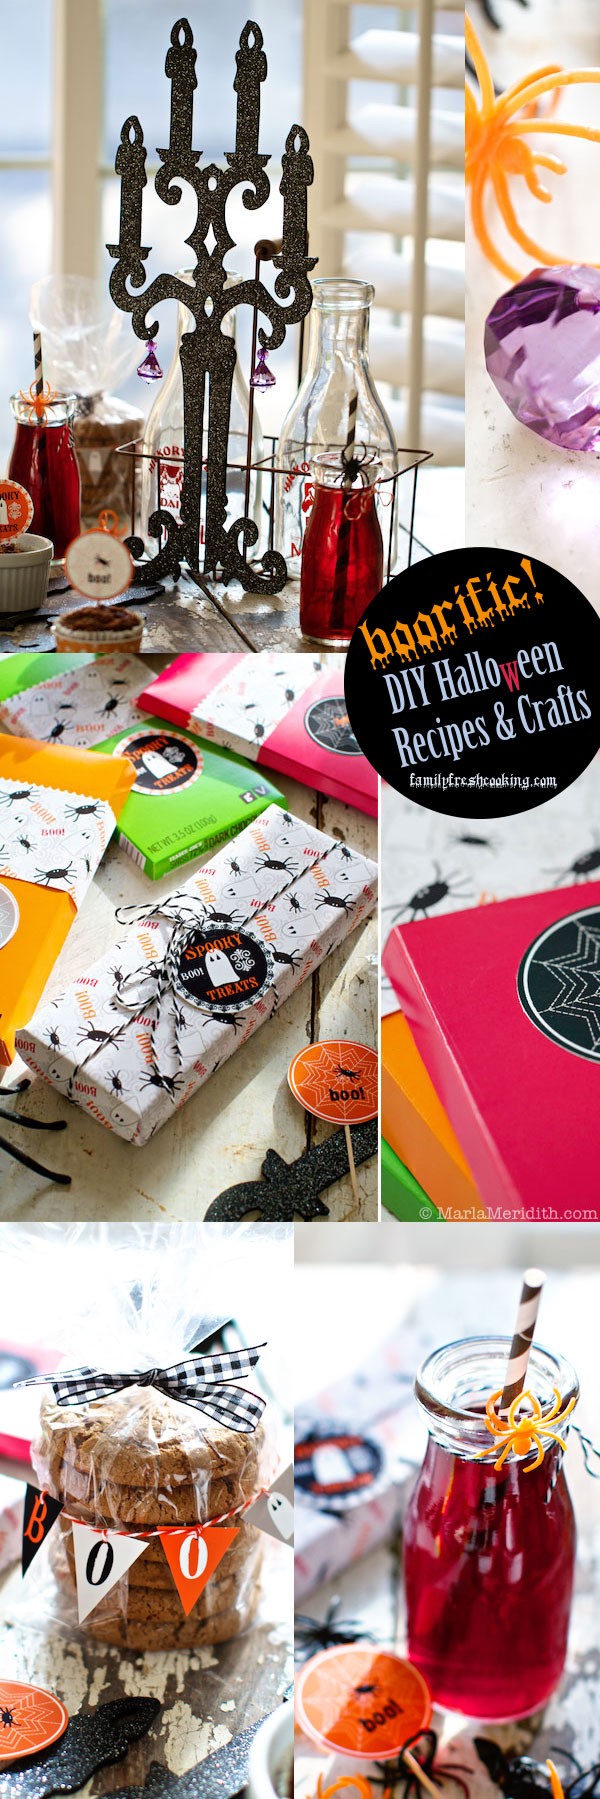 BOOrific! DIY Halloween Ideas to Re-Create at Home ~ Recipes & Crafts | MarlaMeridith.com